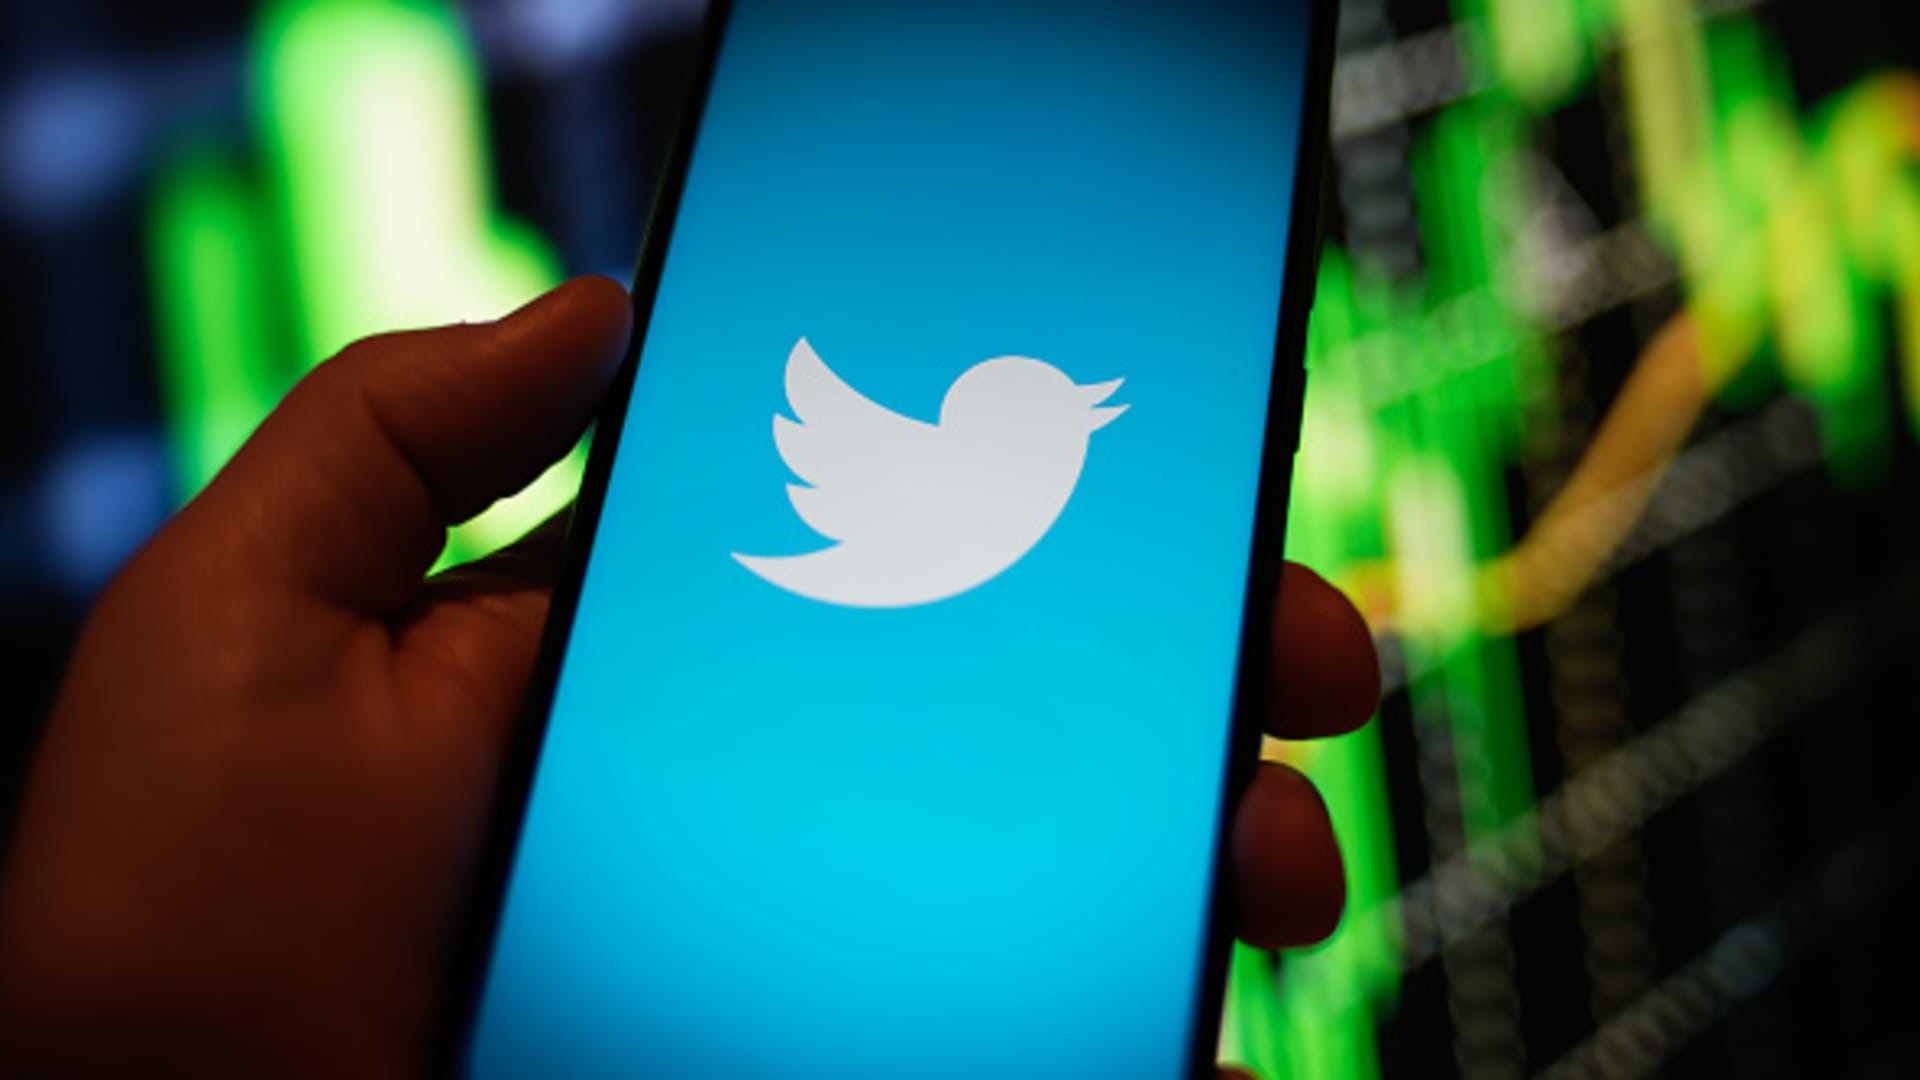 Twitter will finally let you edit tweets â if you pay